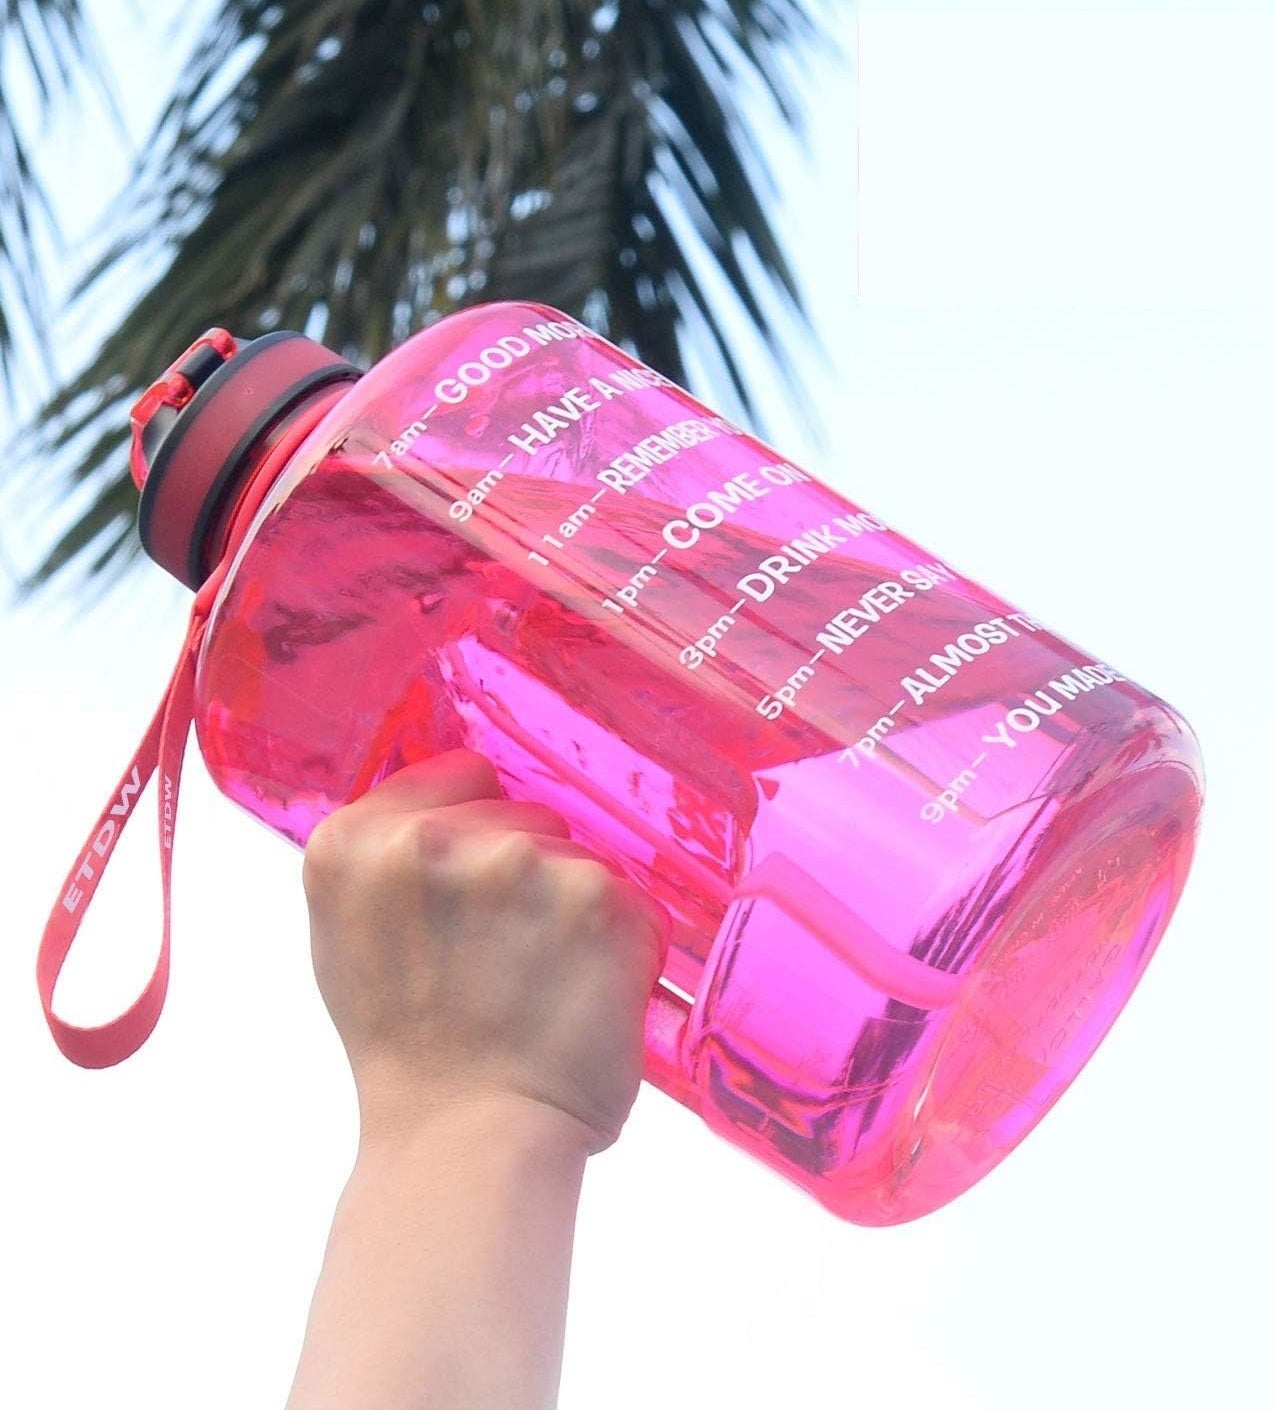 someone lifting the enormous time marked water bottle into the air